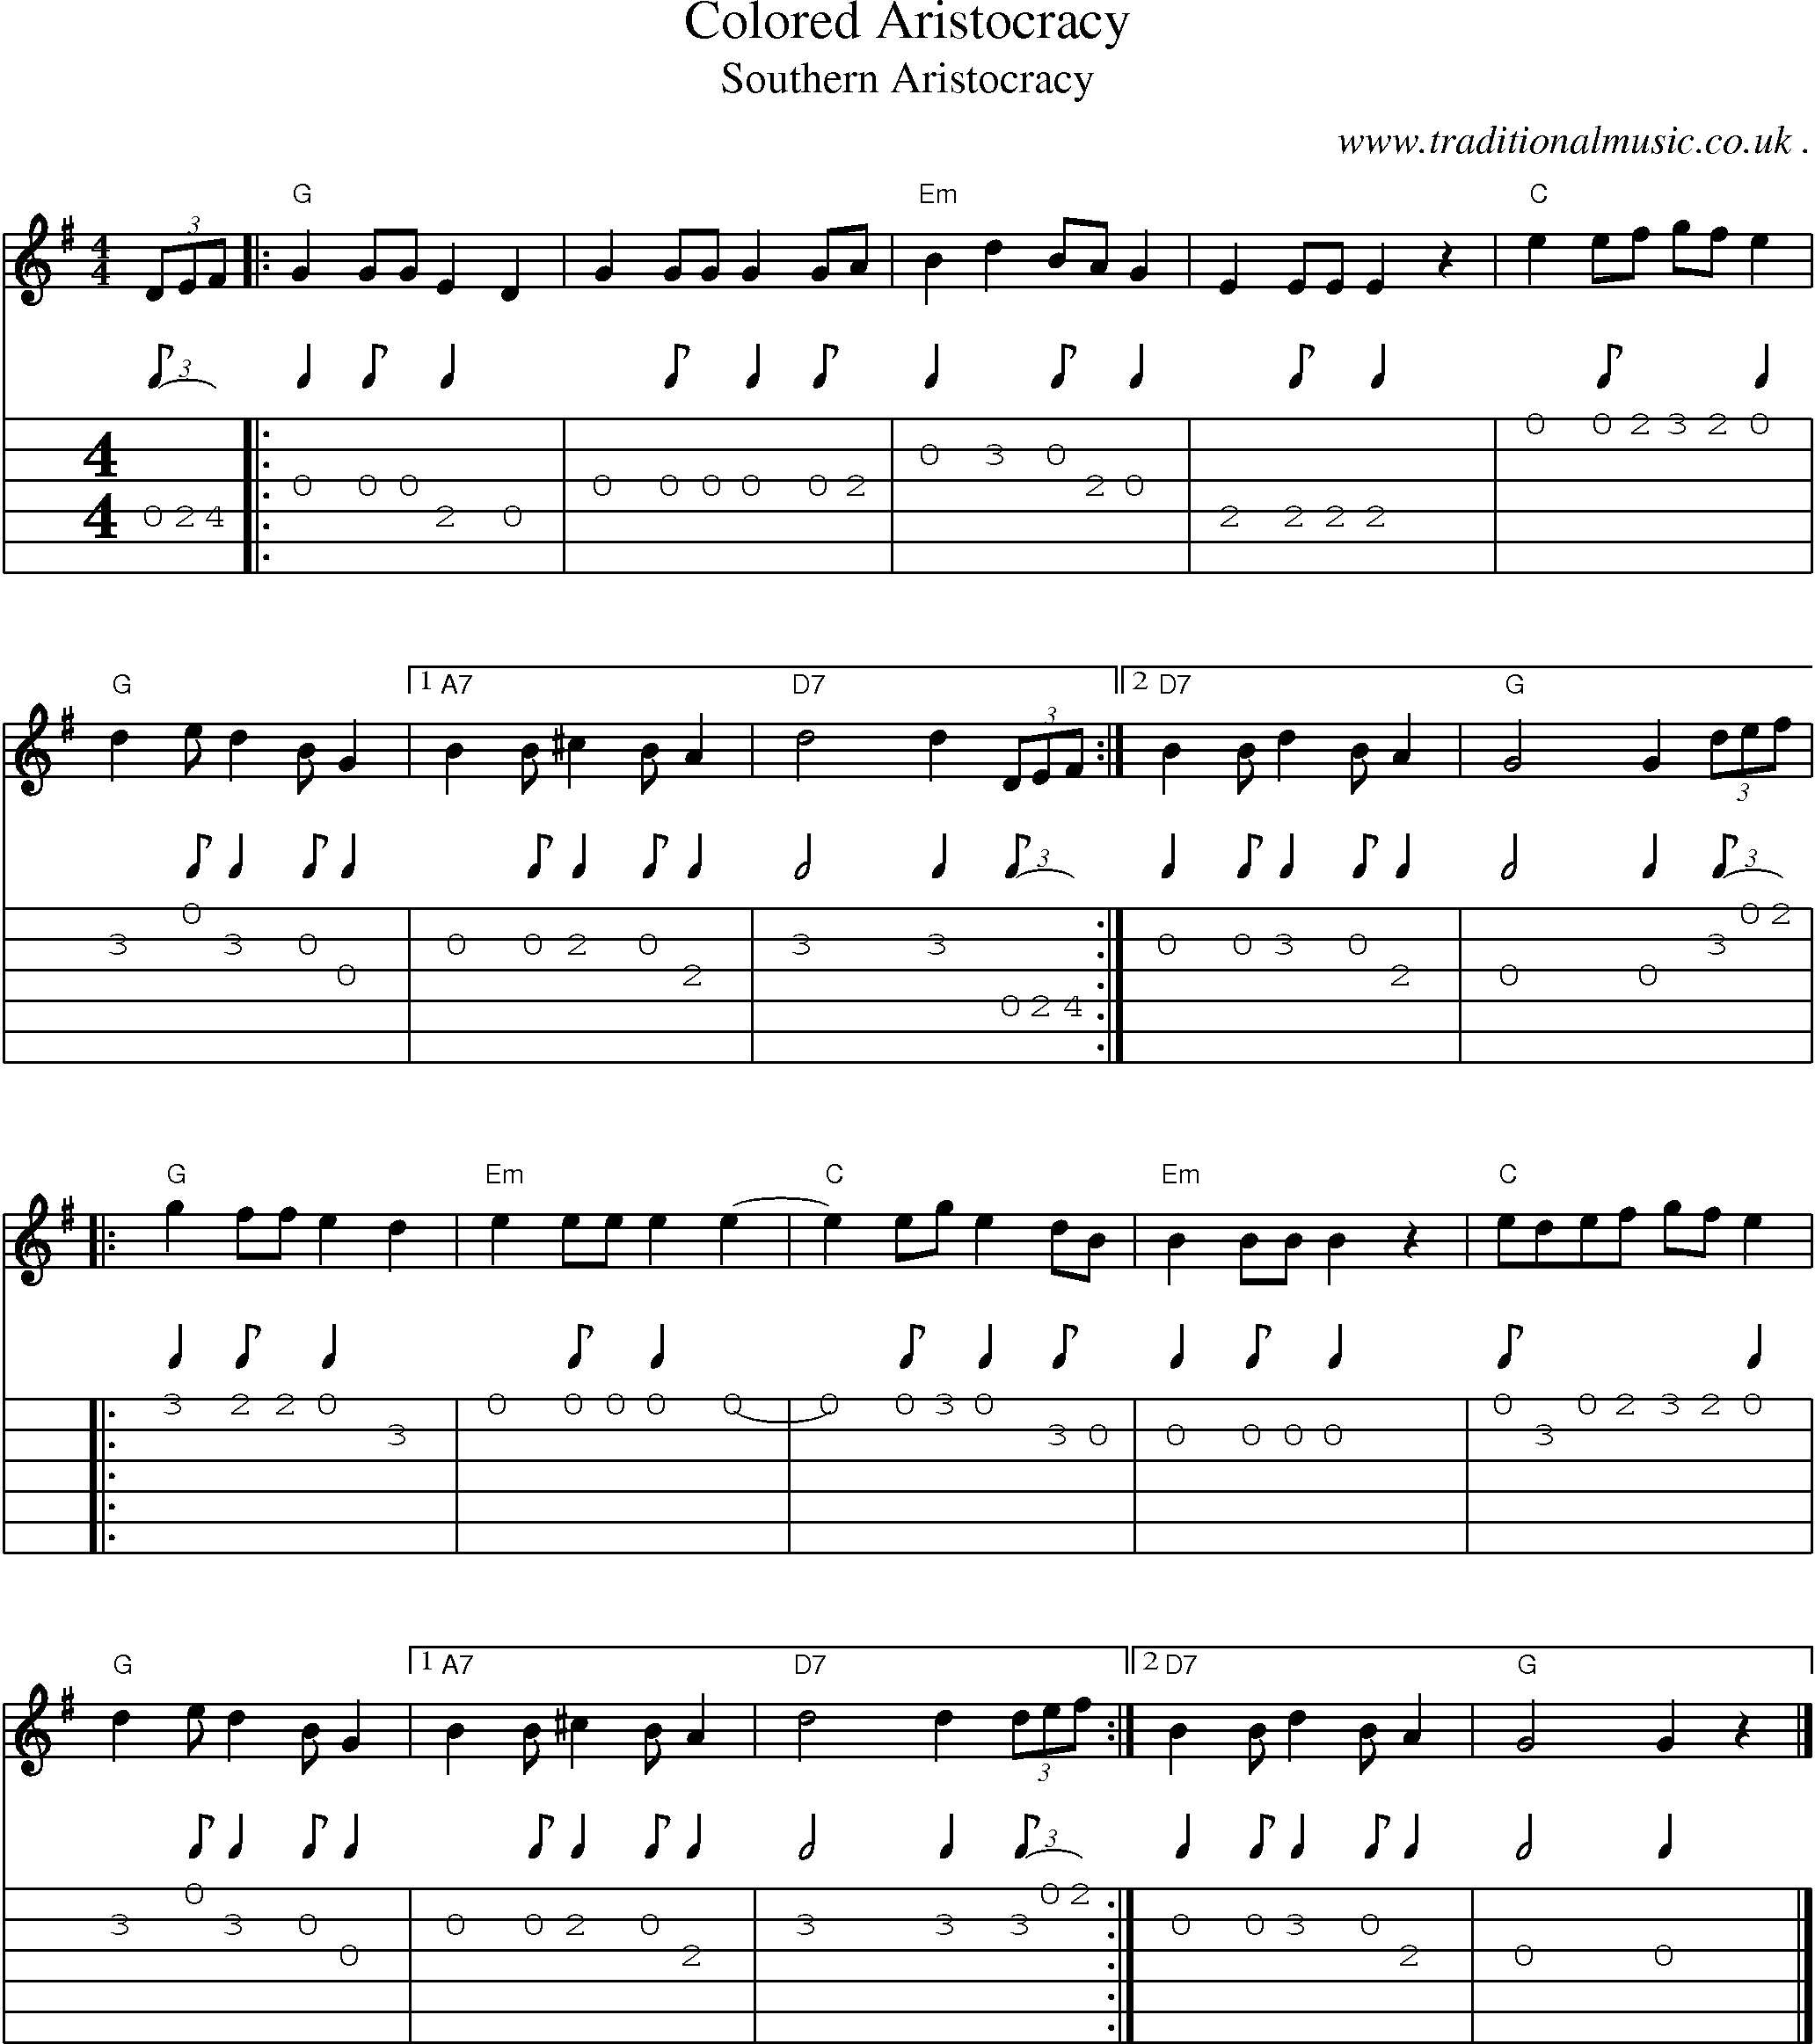 Music Score and Guitar Tabs for Colored Aristocracy